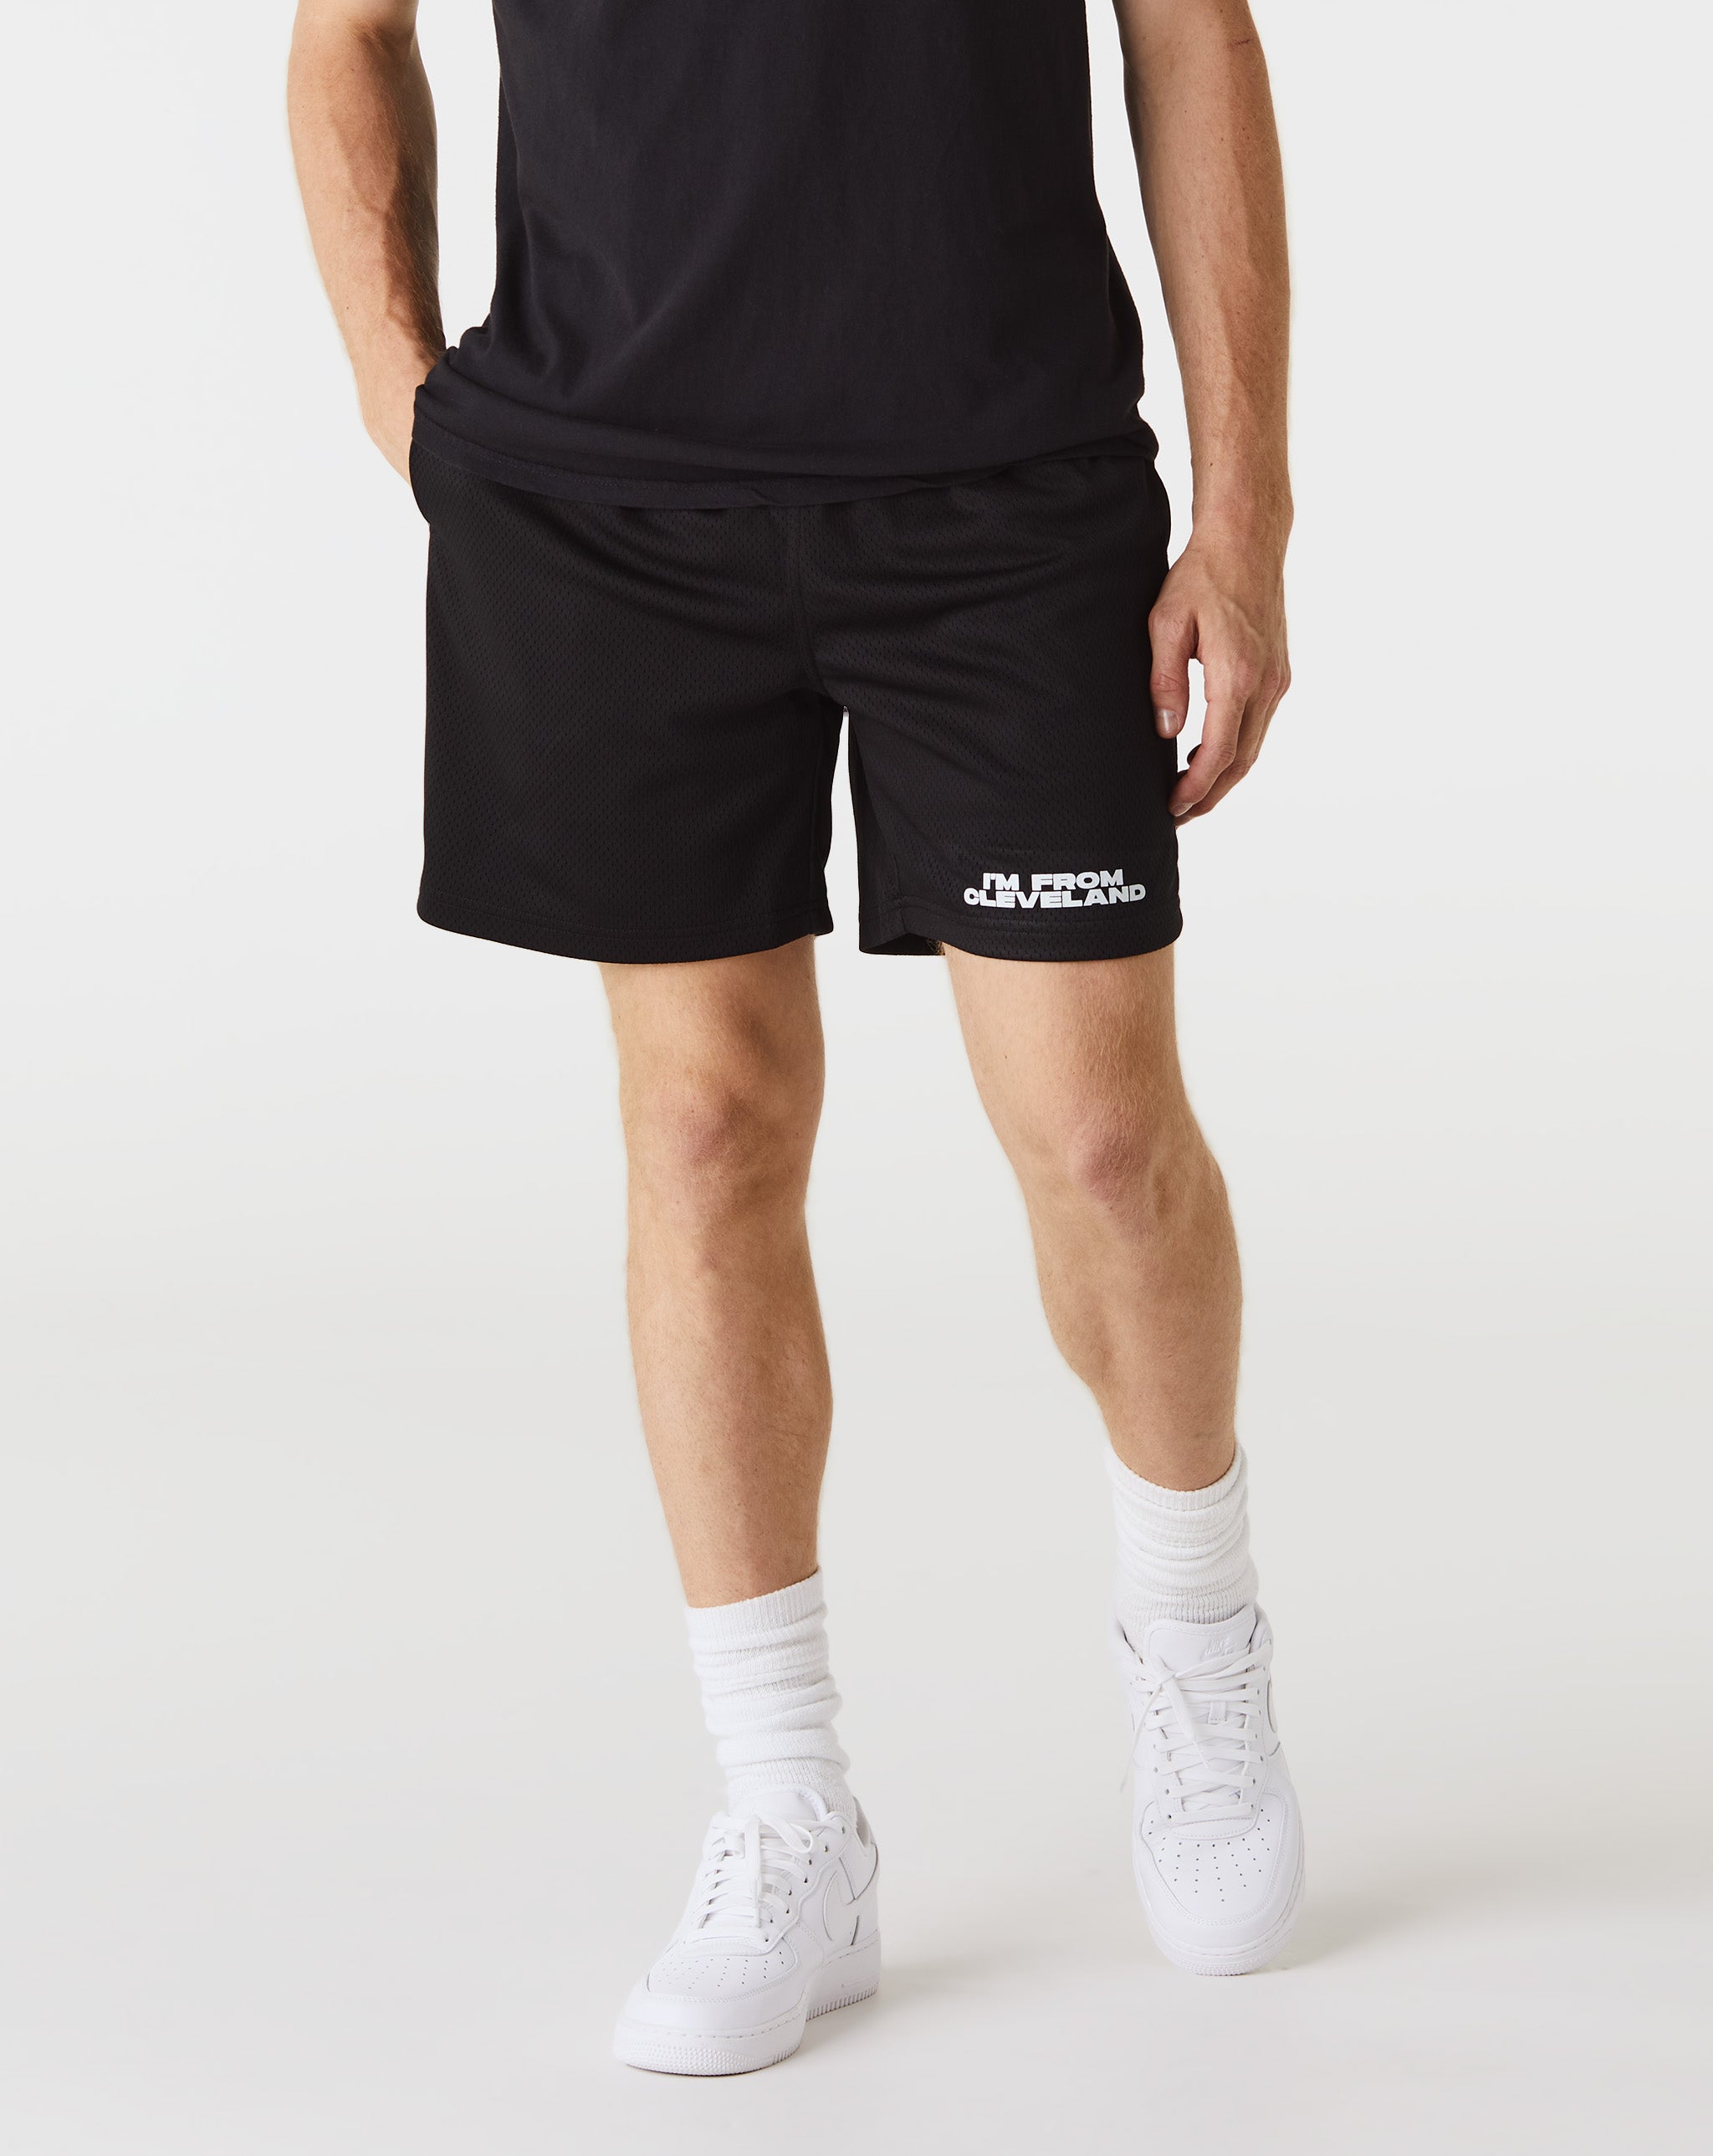 I'm From Cleveland I'm From Cleveland Mesh Shorts  - Cheap Cerbe Jordan outlet